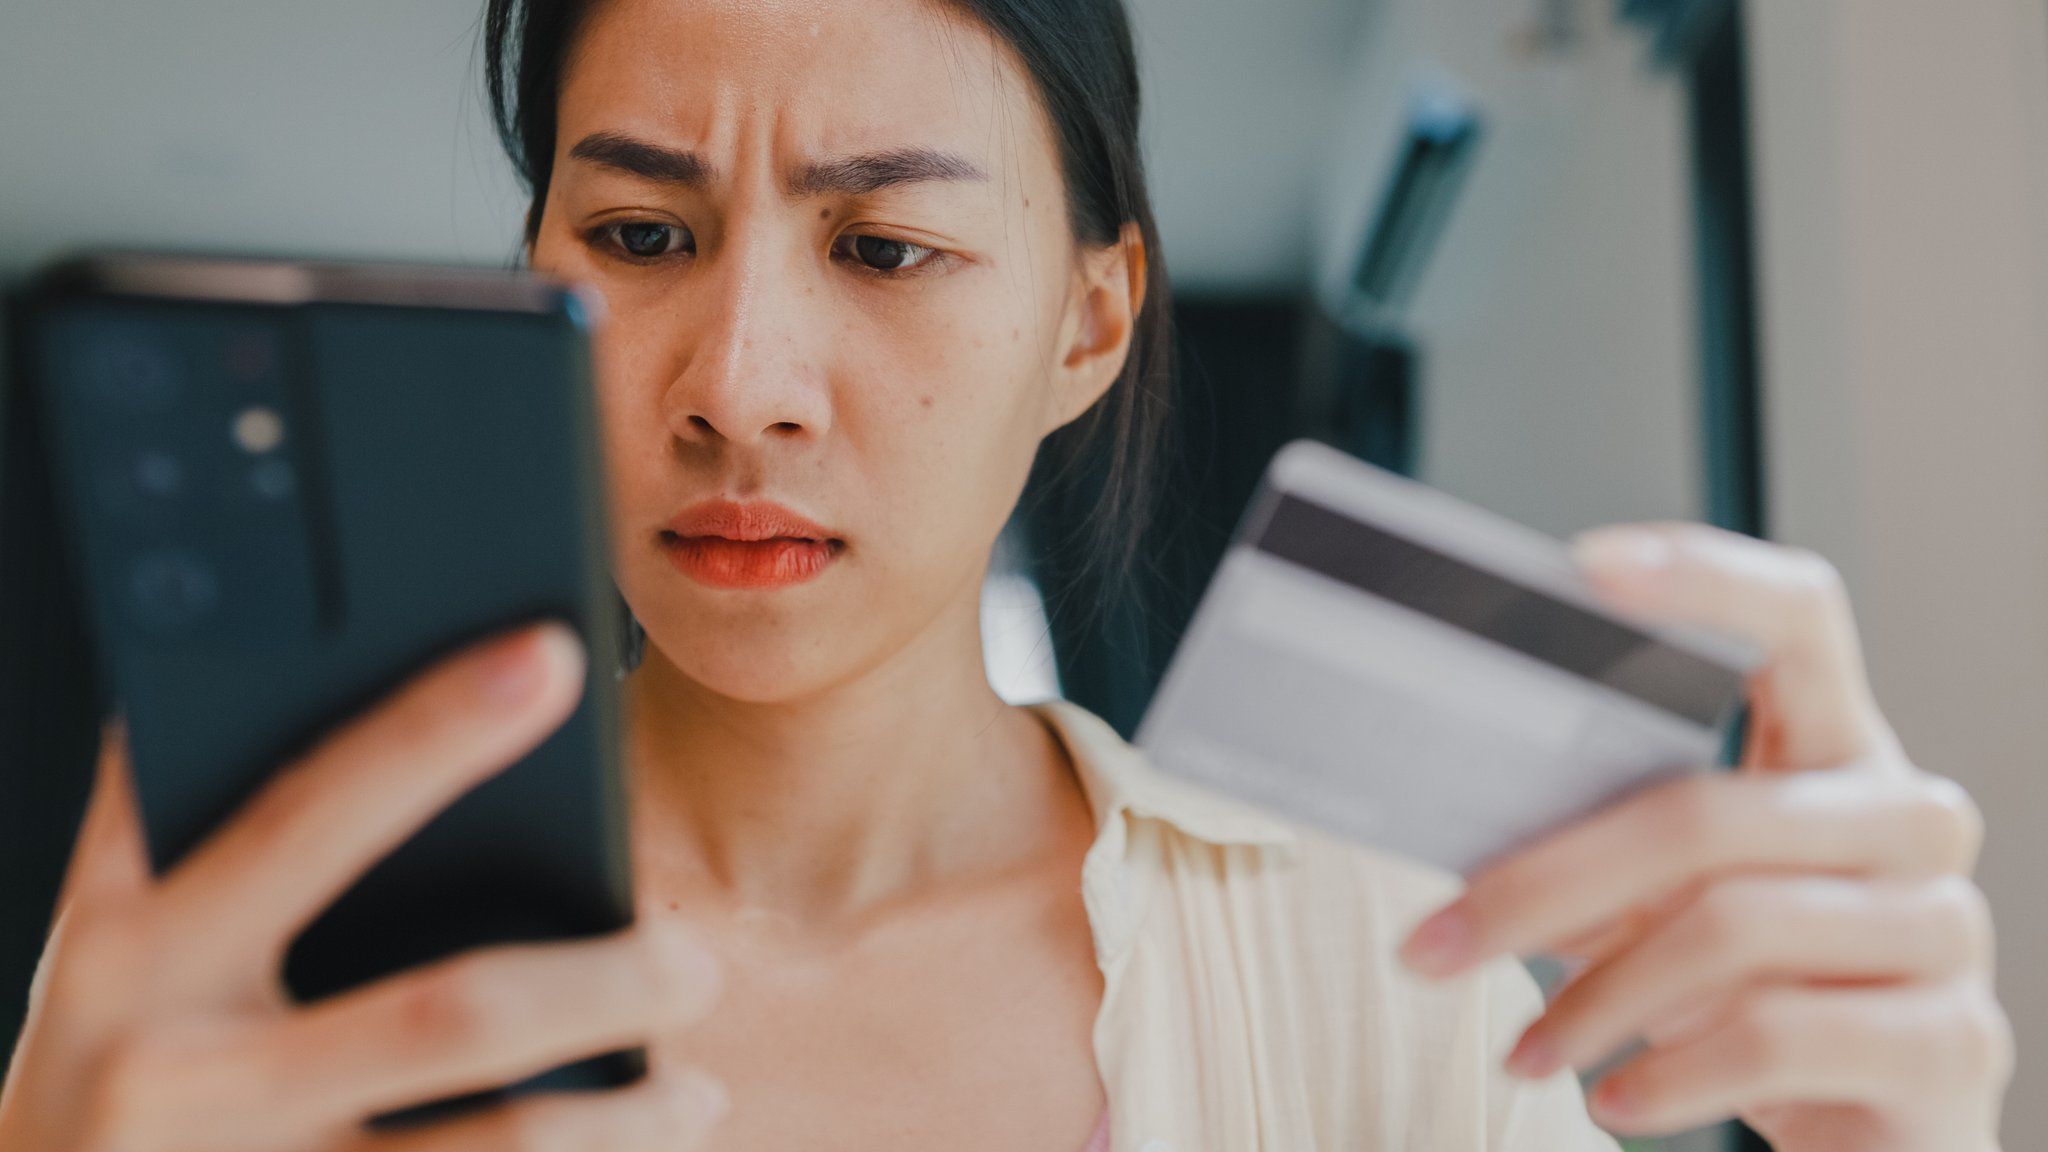 Woman looking worried holding phone and bank card